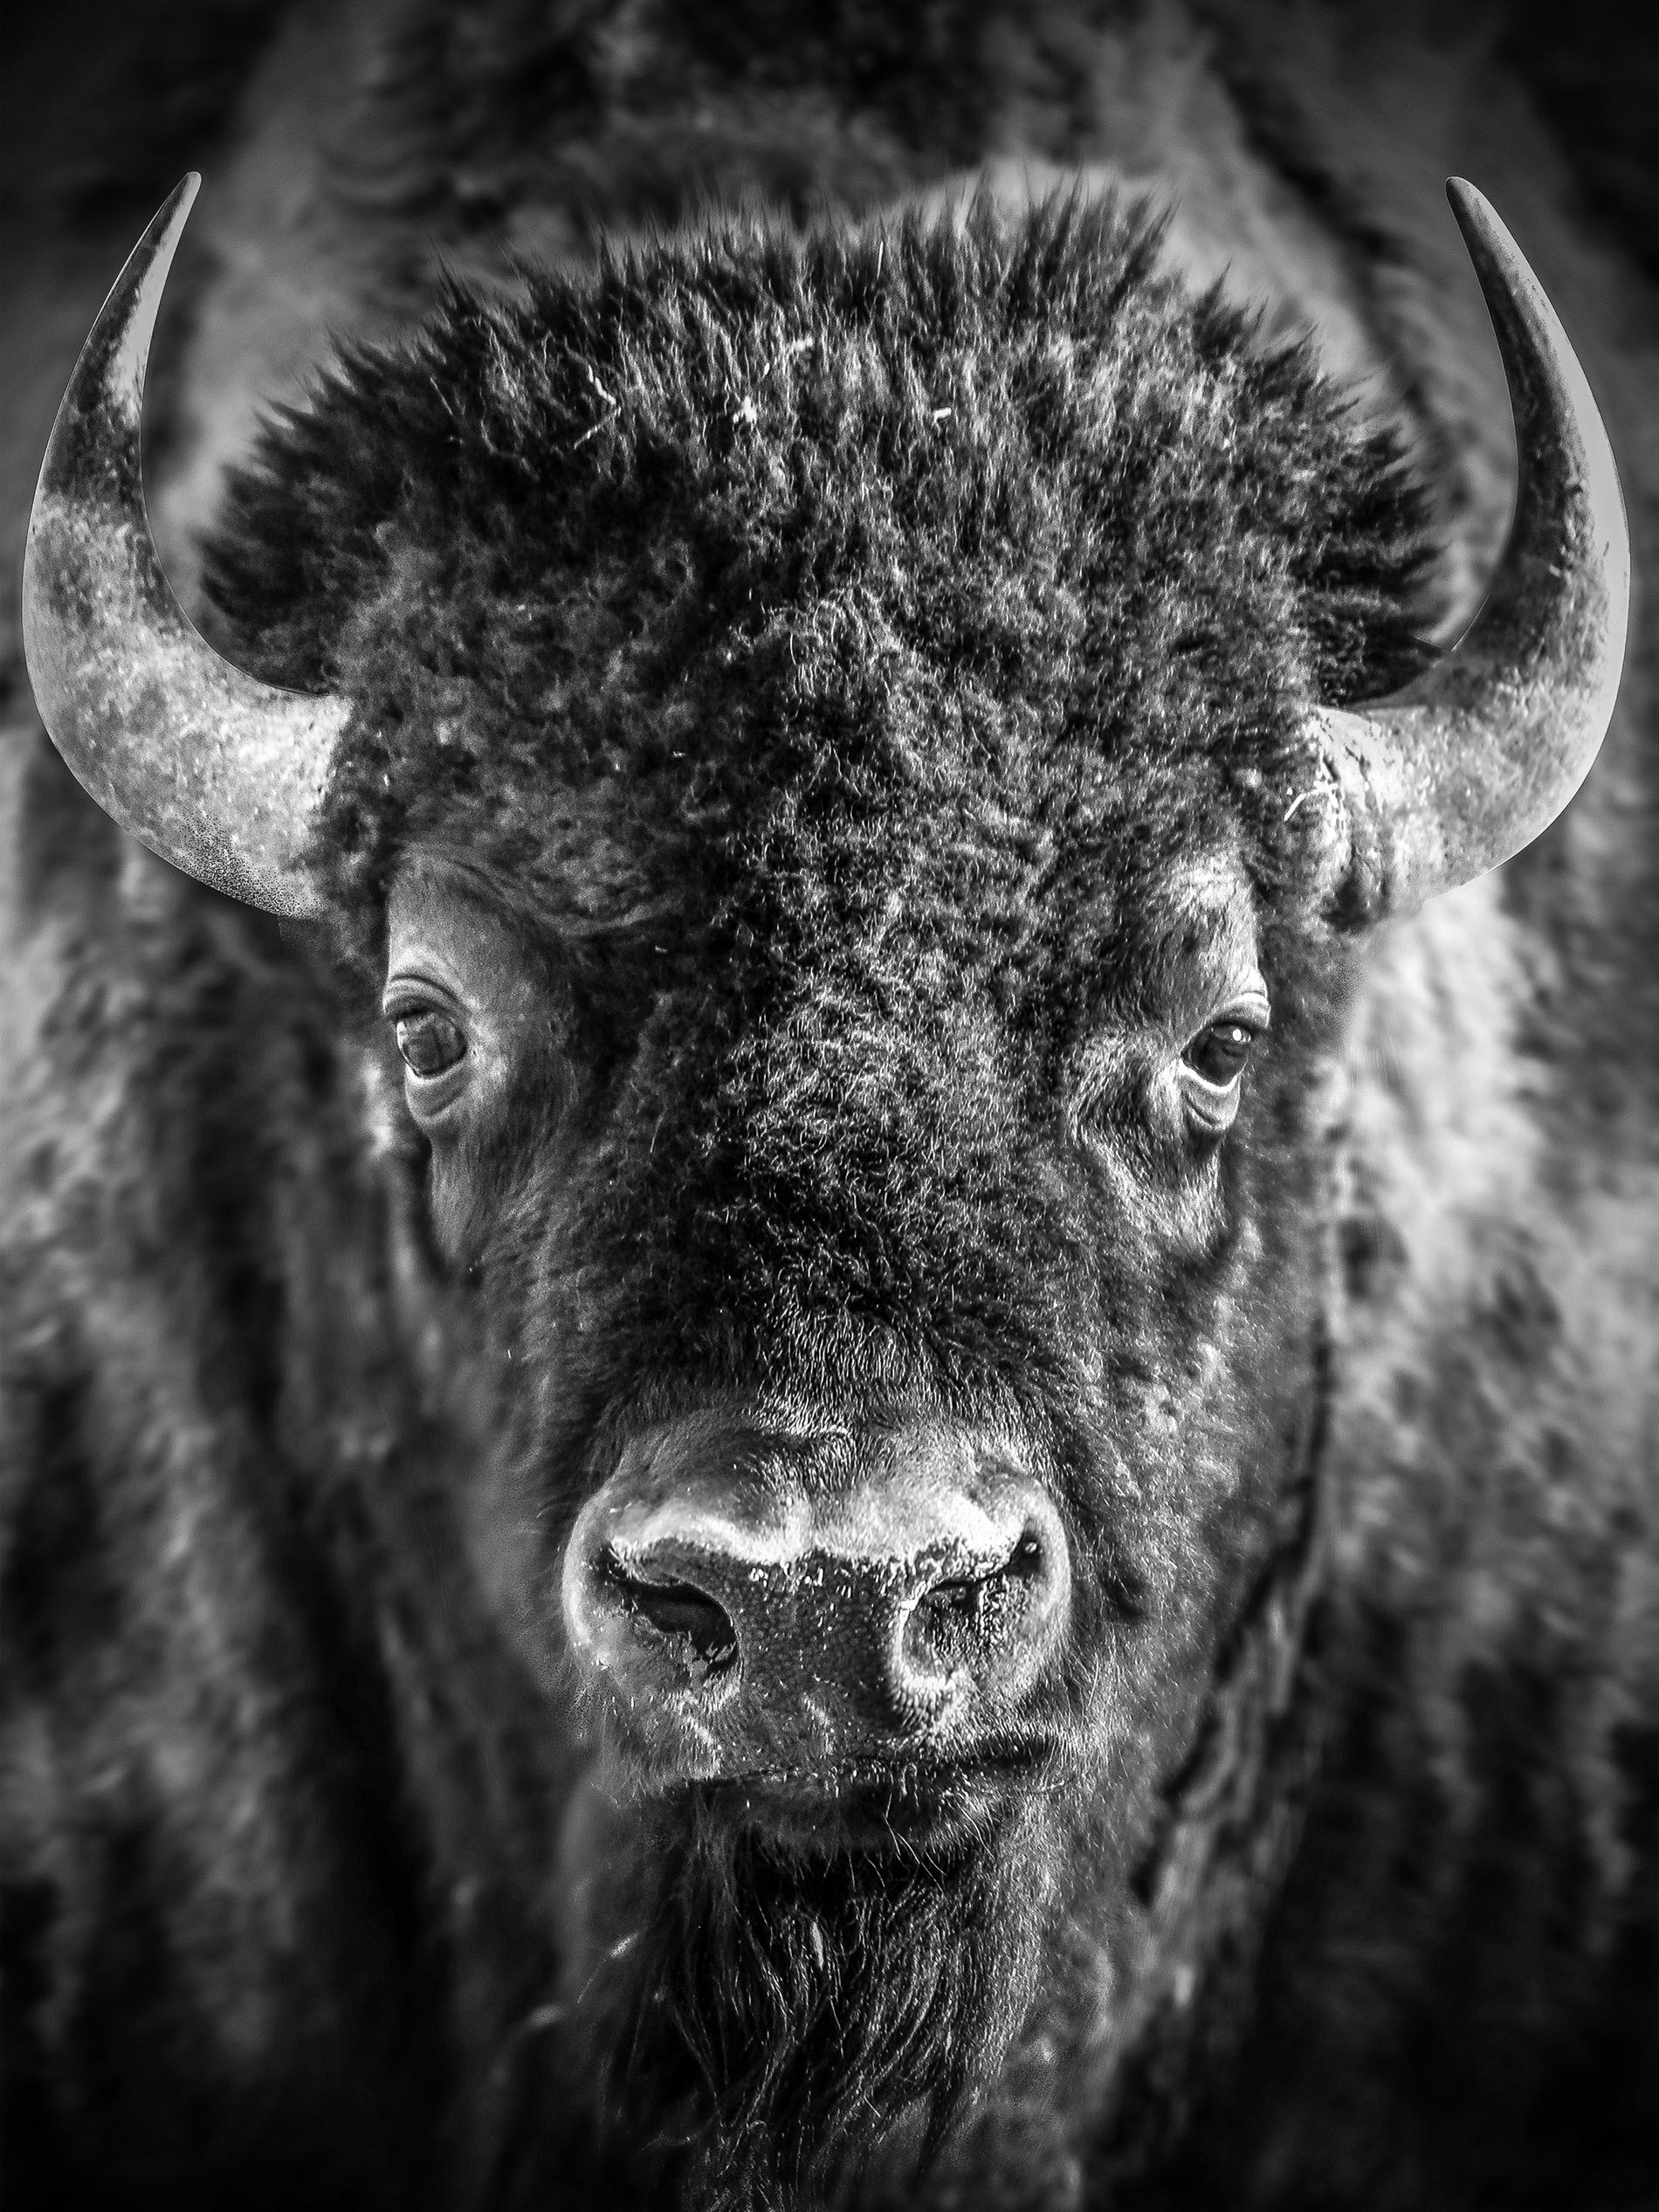 Shane Russeck Black and White Photograph -   "Bison Portrait Black & White Photography Buffalo 48x36 Signed Photograph Art